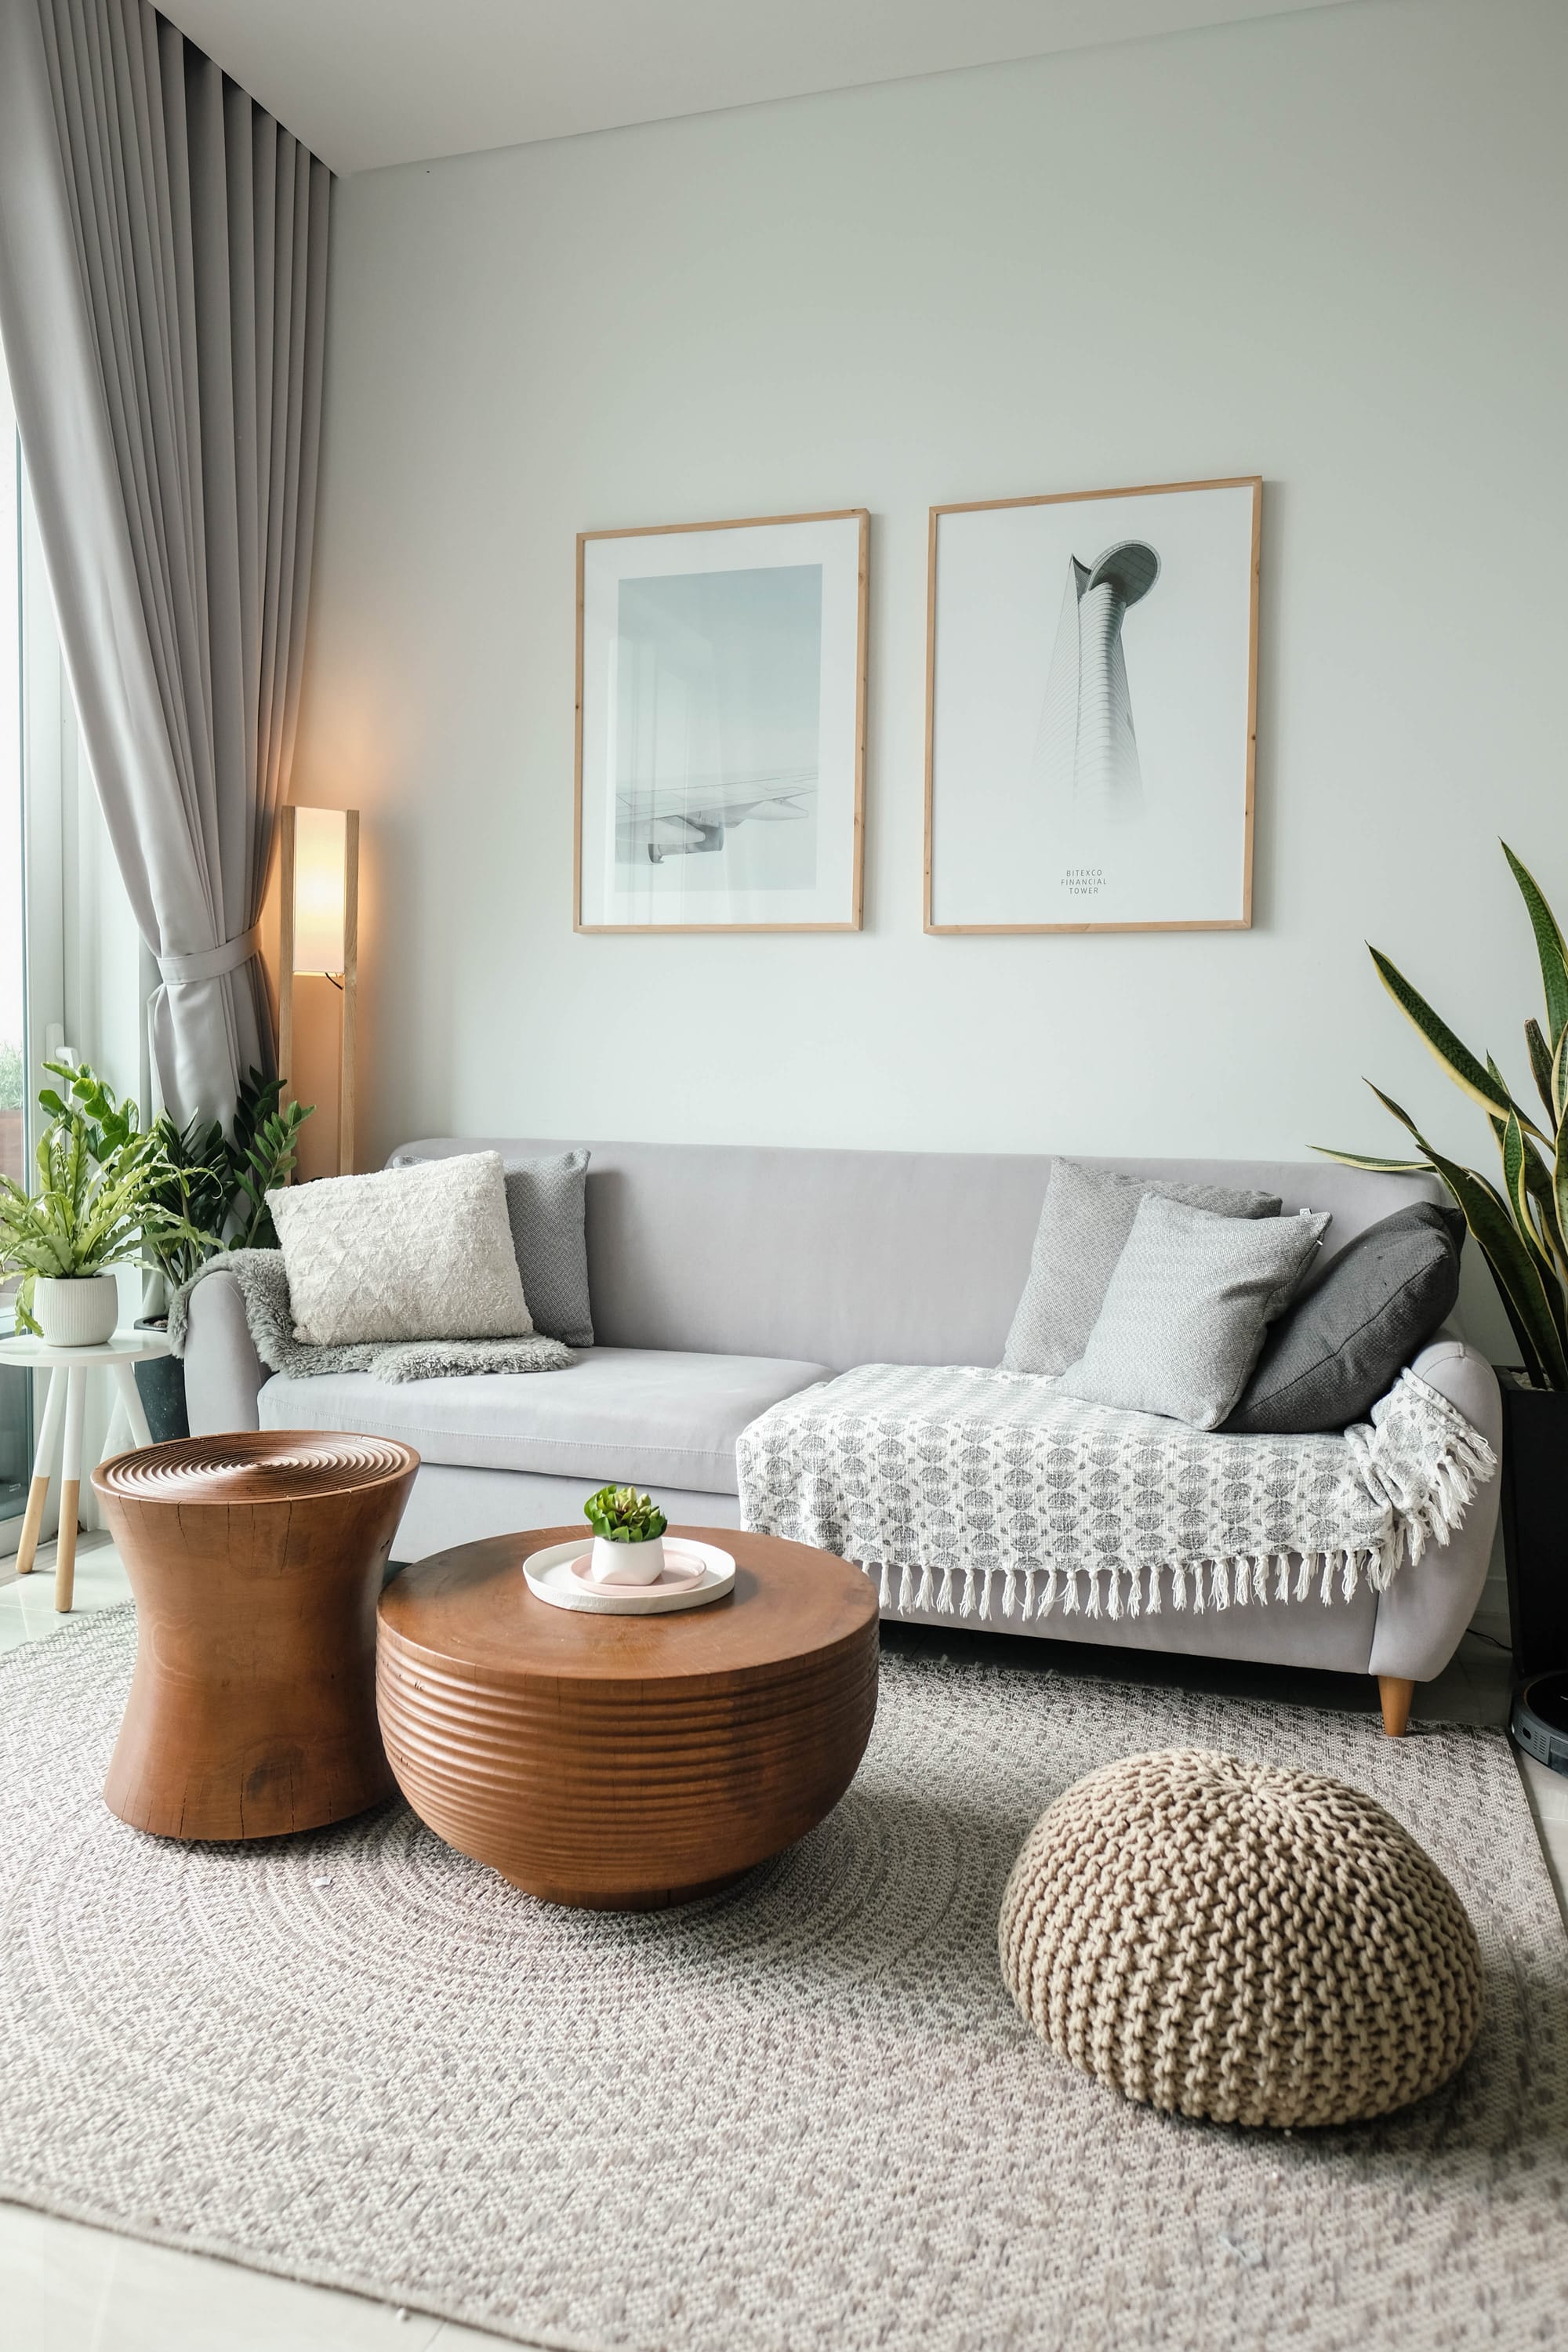 A grey couch with throw pillows and an ottoman